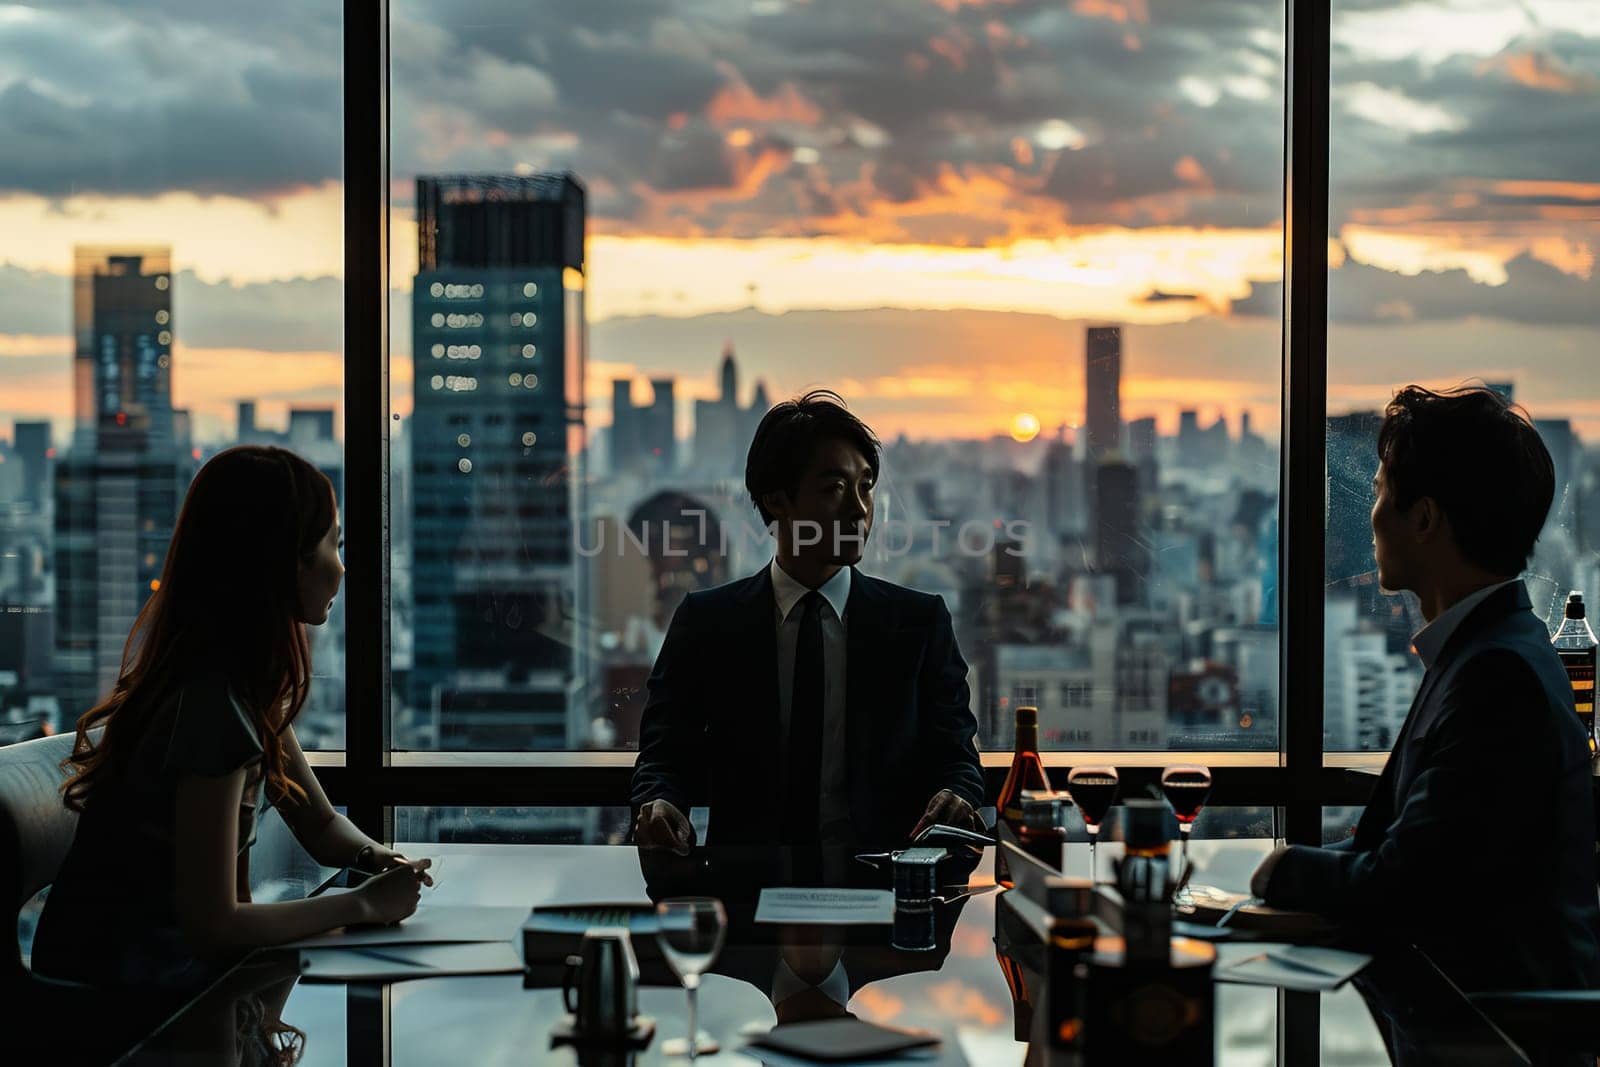 Three people are sitting at a table in a city, with a sunset in the background. They are dressed in business attire and appear to be discussing something important